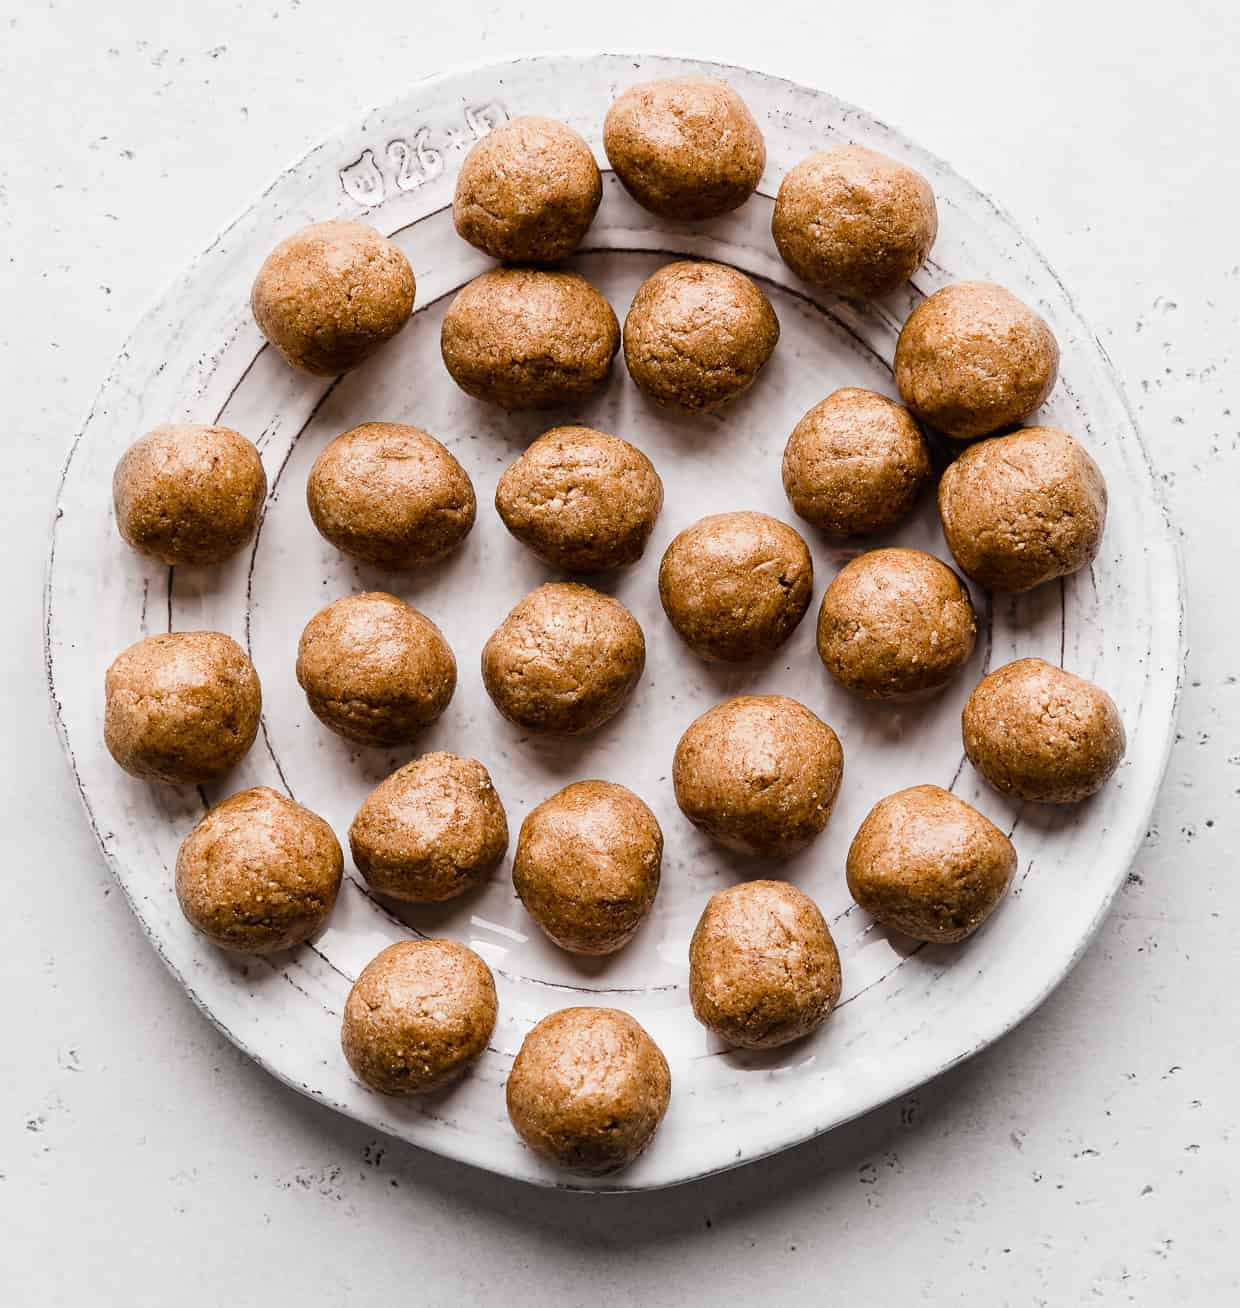 Snicker Doodle Protein Balls on a white Plate make for an easy lunch box recipes